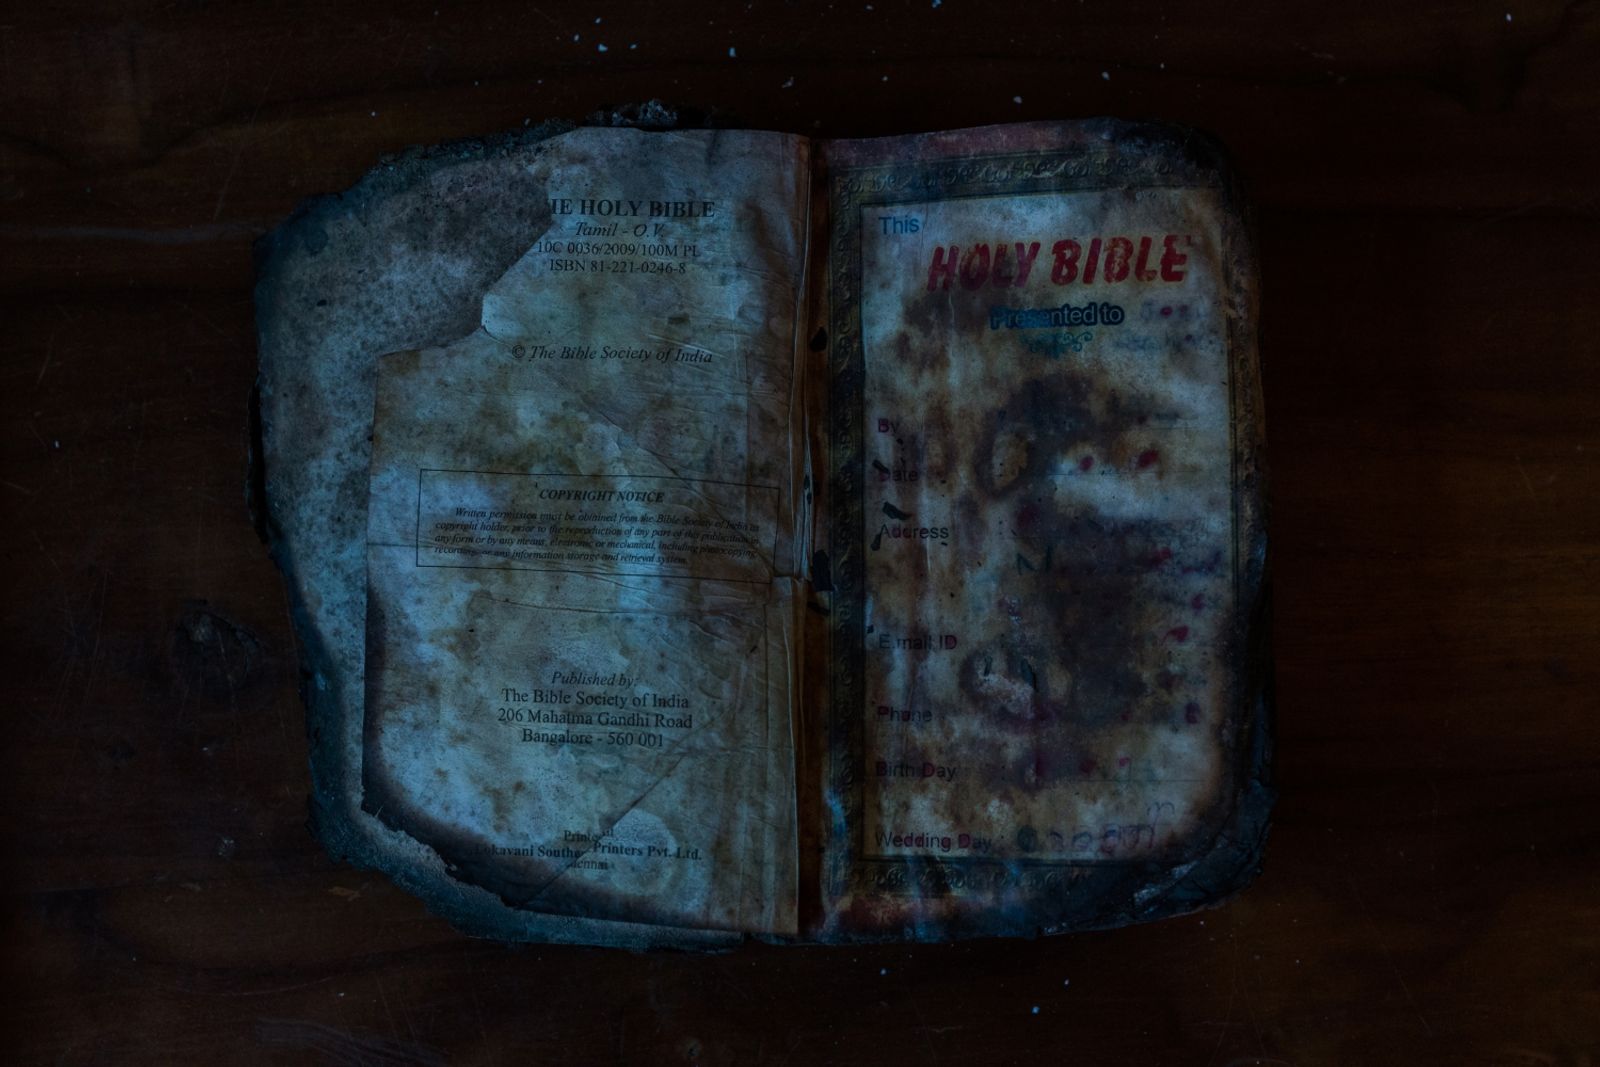 © Kai Yokoyama - Unknown : They still don't know who owned this Bible.